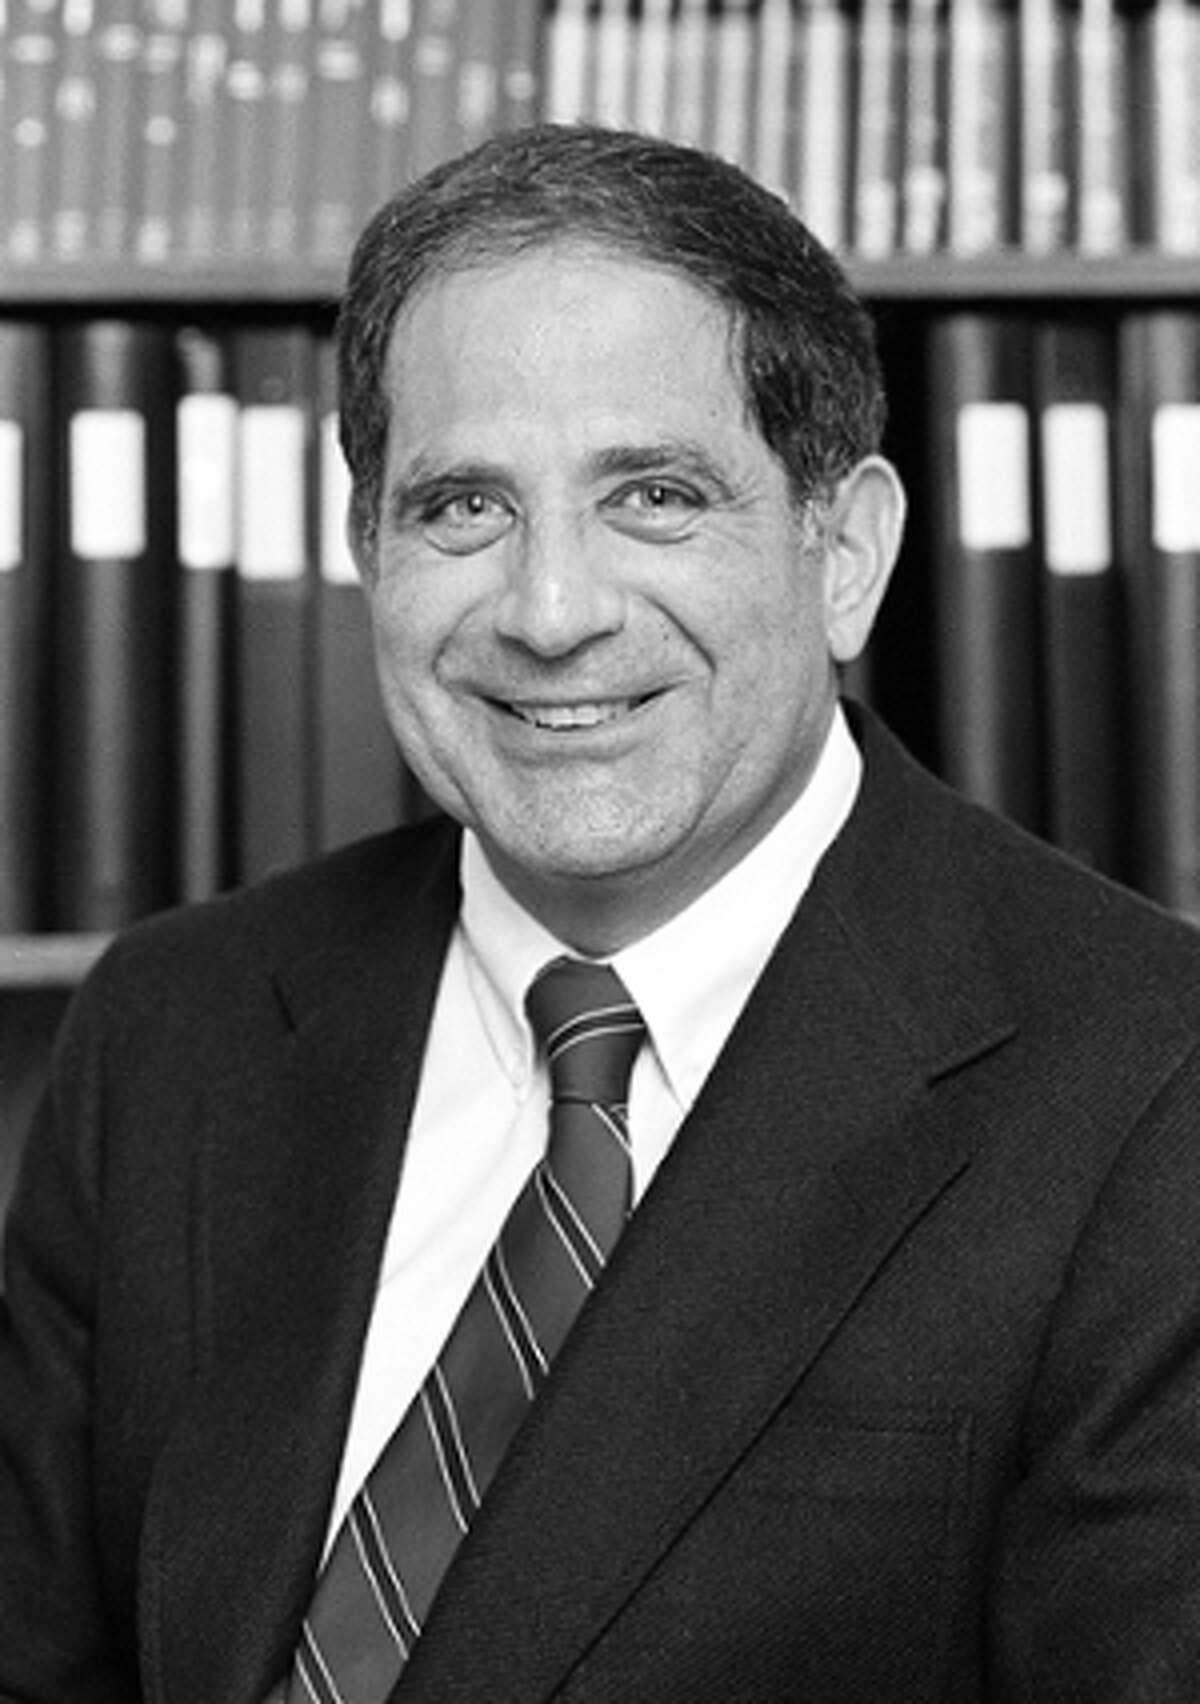 SIUE professor emeritus Jack Shaheen, PhD, a renowned expert on racial stereotyping of marginalized groups such as Arab and Muslim people, died Sunday, July 9, at Medical University of South Carolina in Charleston. He was 81.